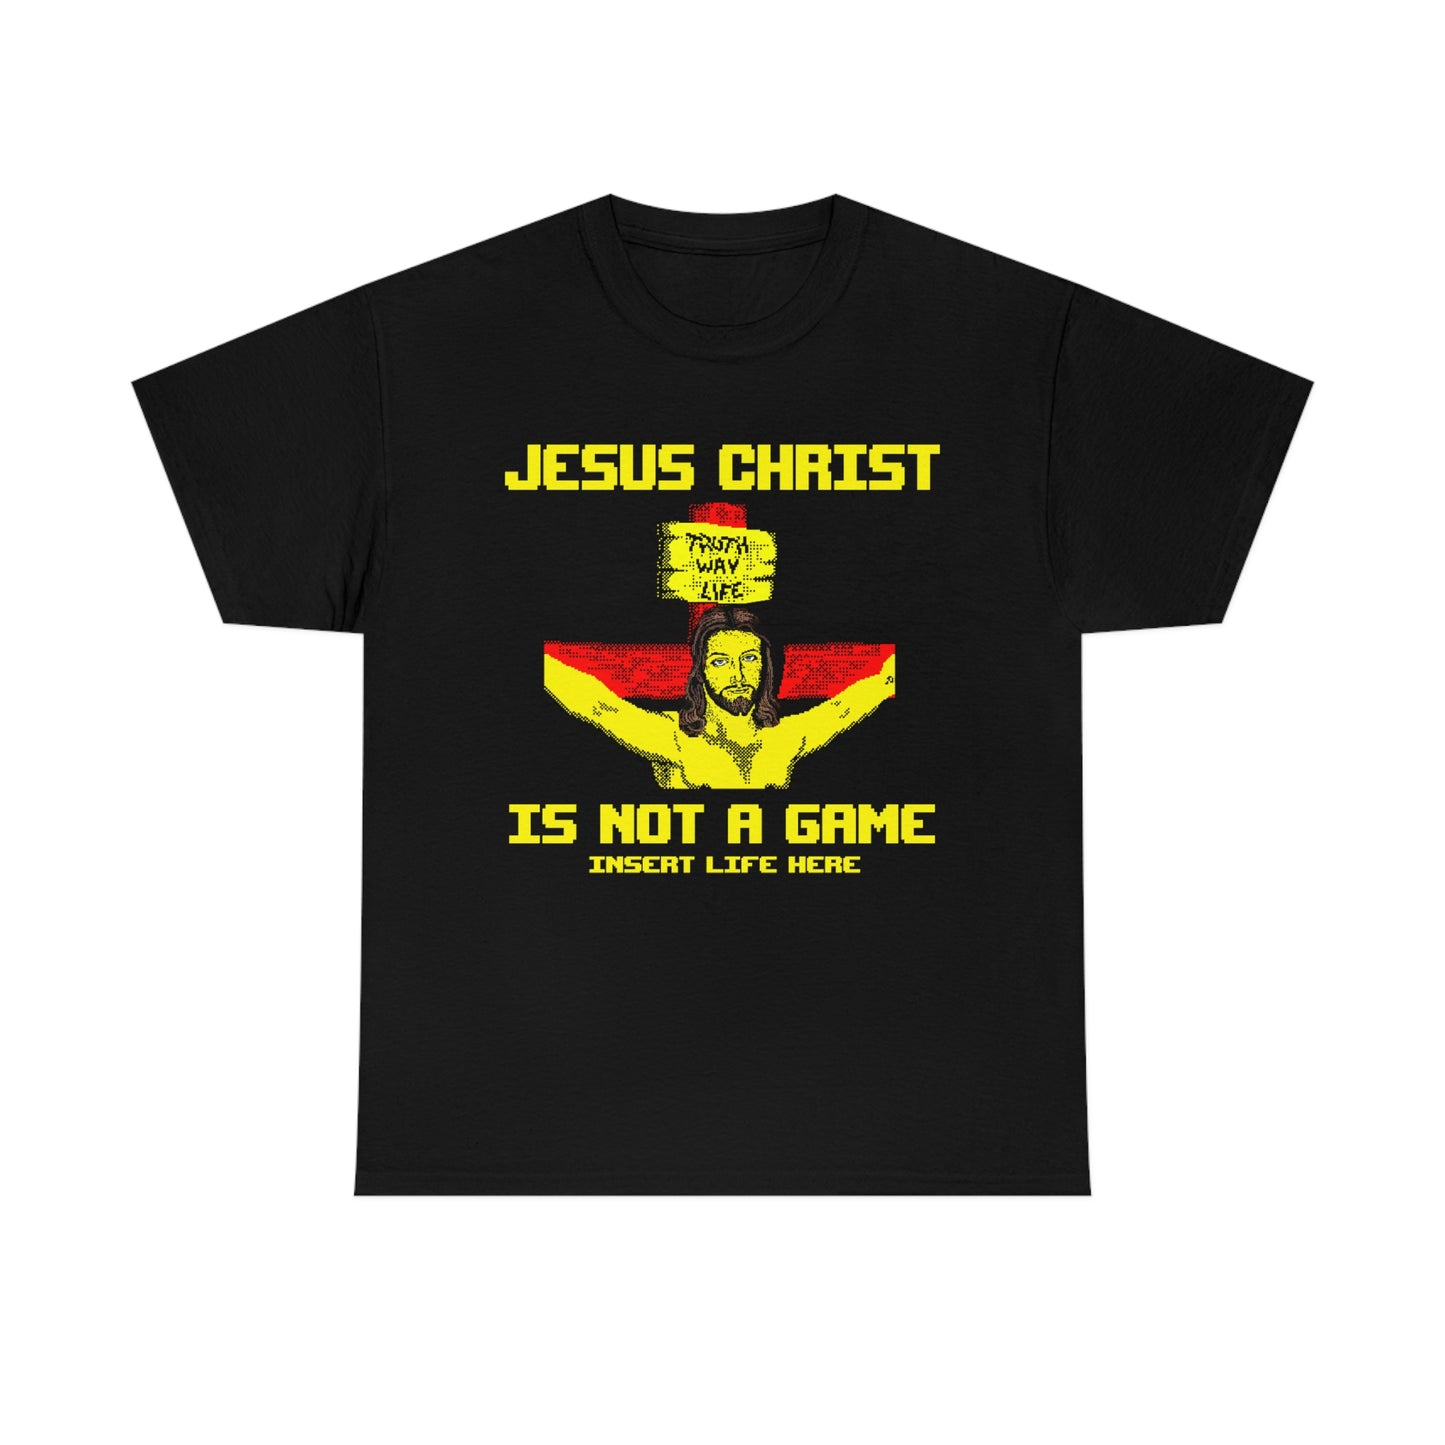 Jesus Christ Is Not A Game (8-bit).